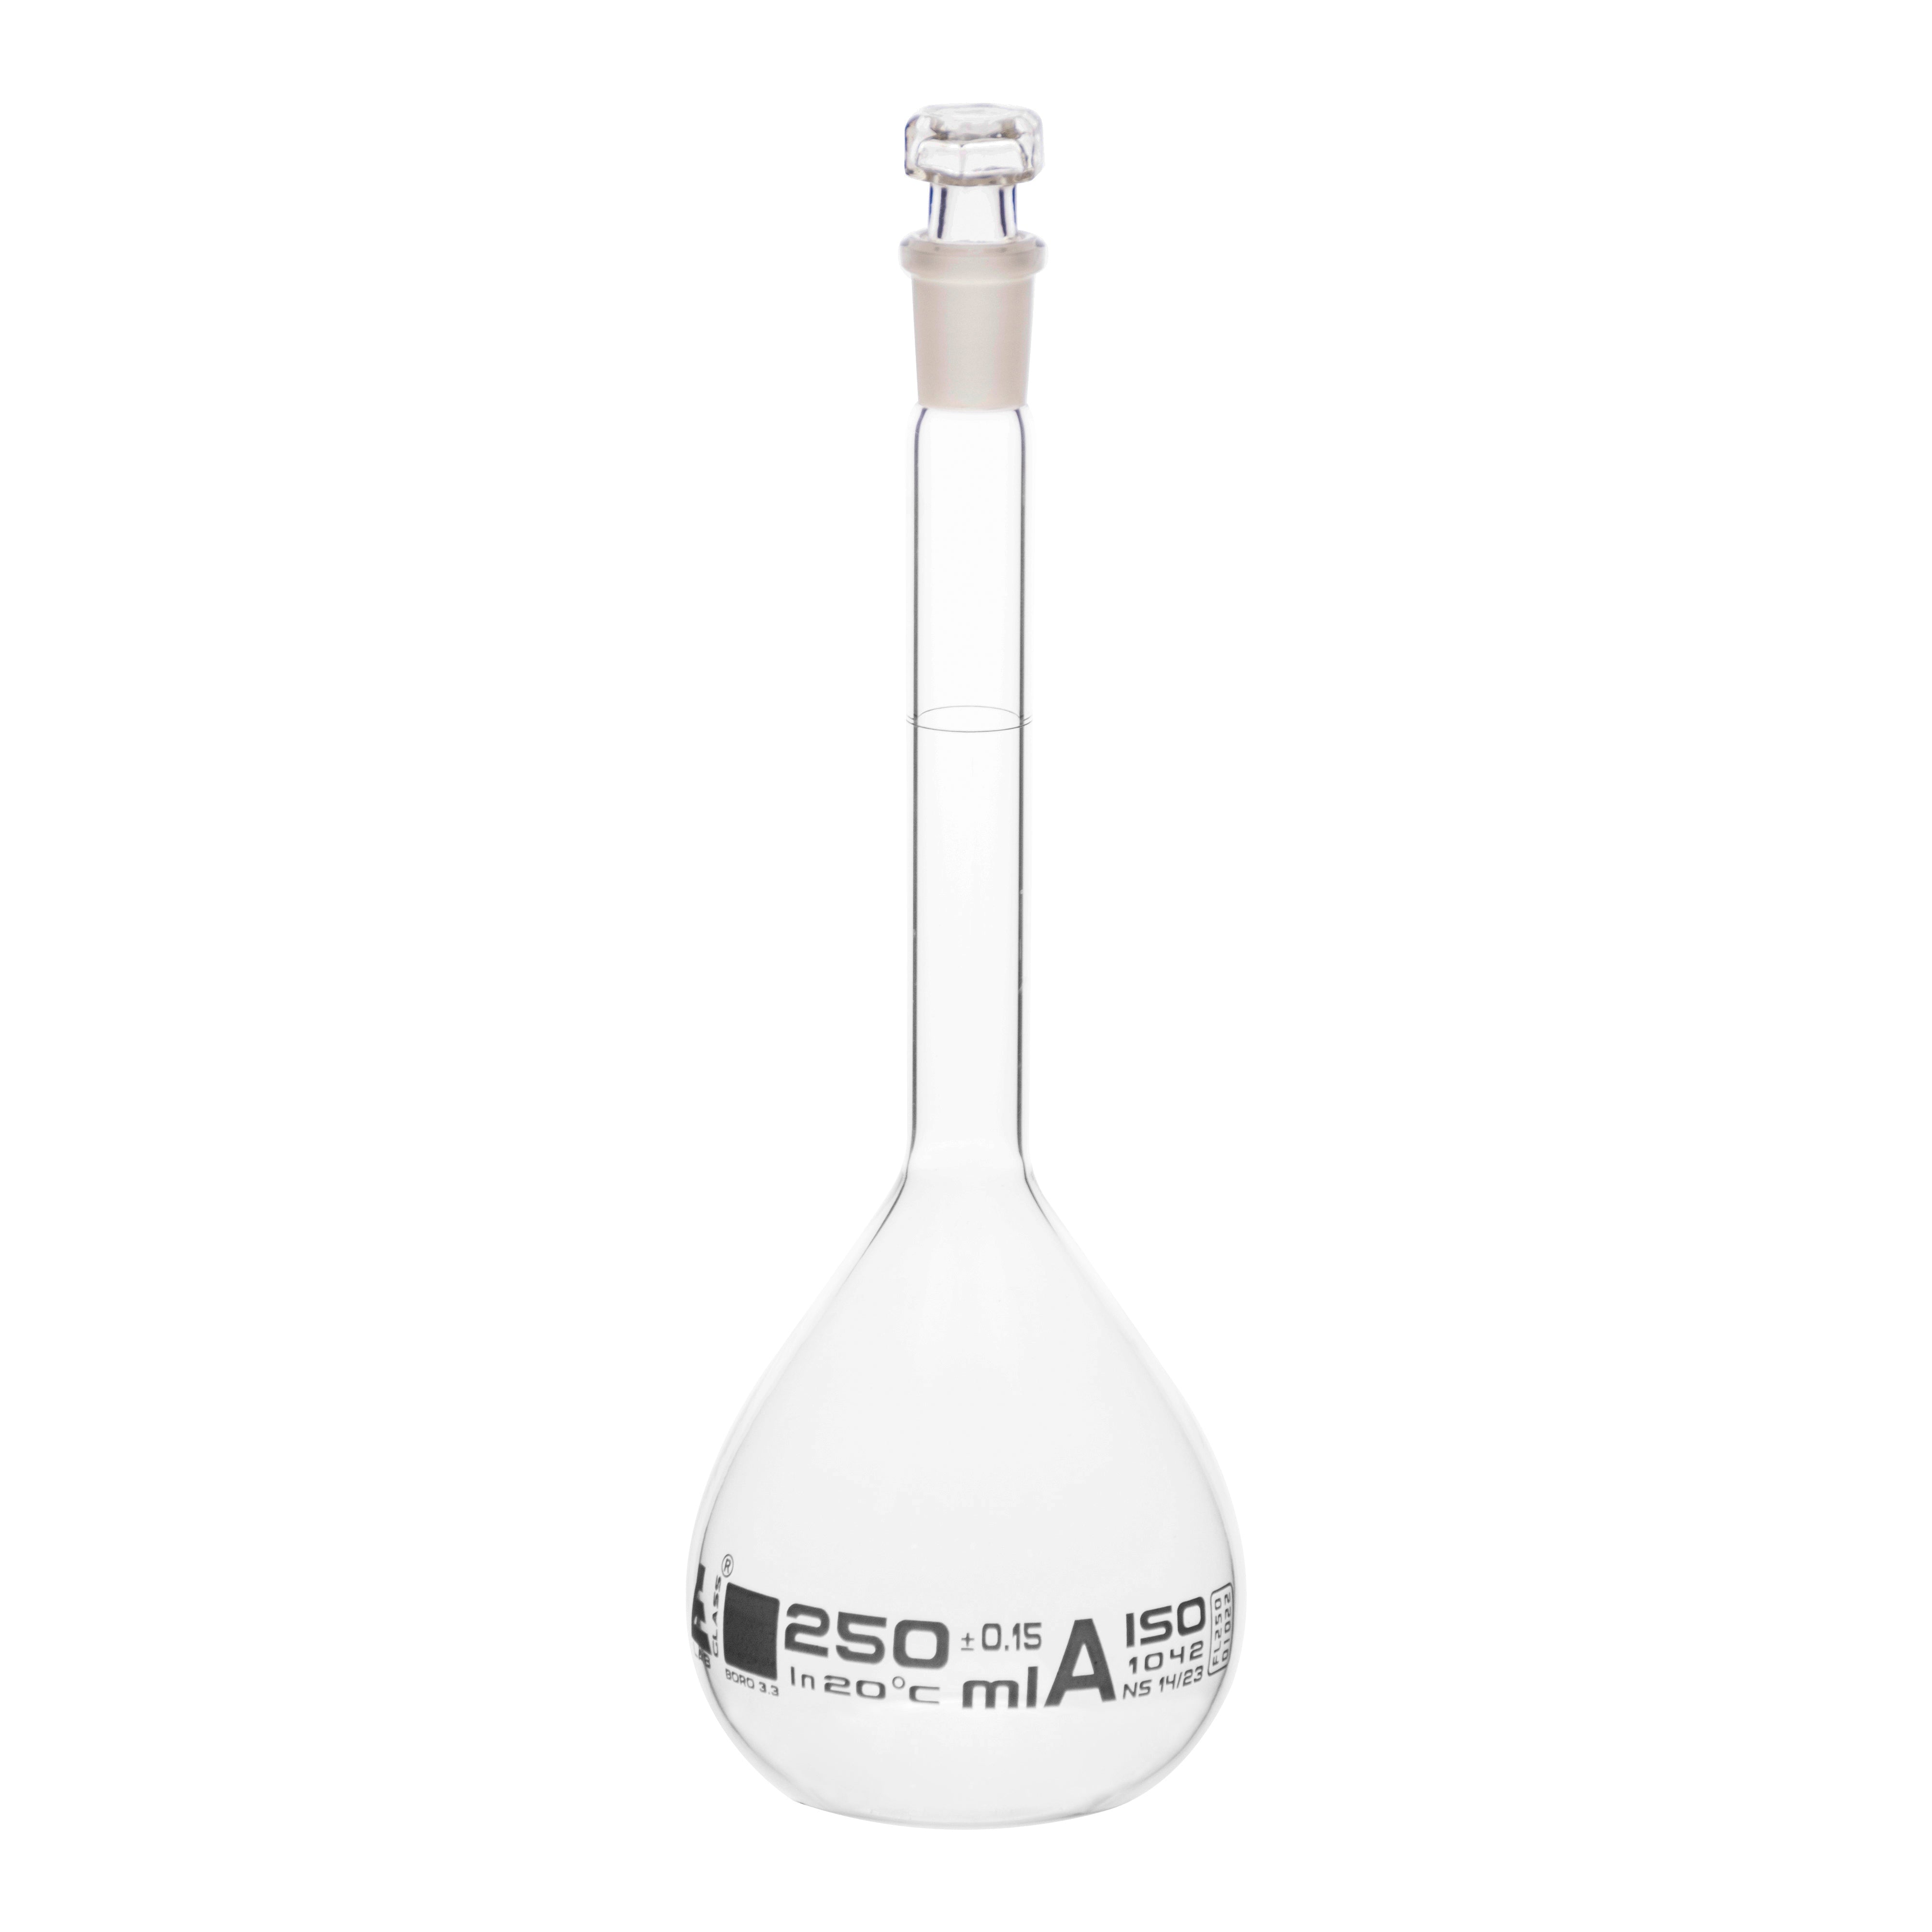 Borosilicate Volumetric Flask with Hollow Glass Stopper, 250ml, Class A, White Print, Autoclavable